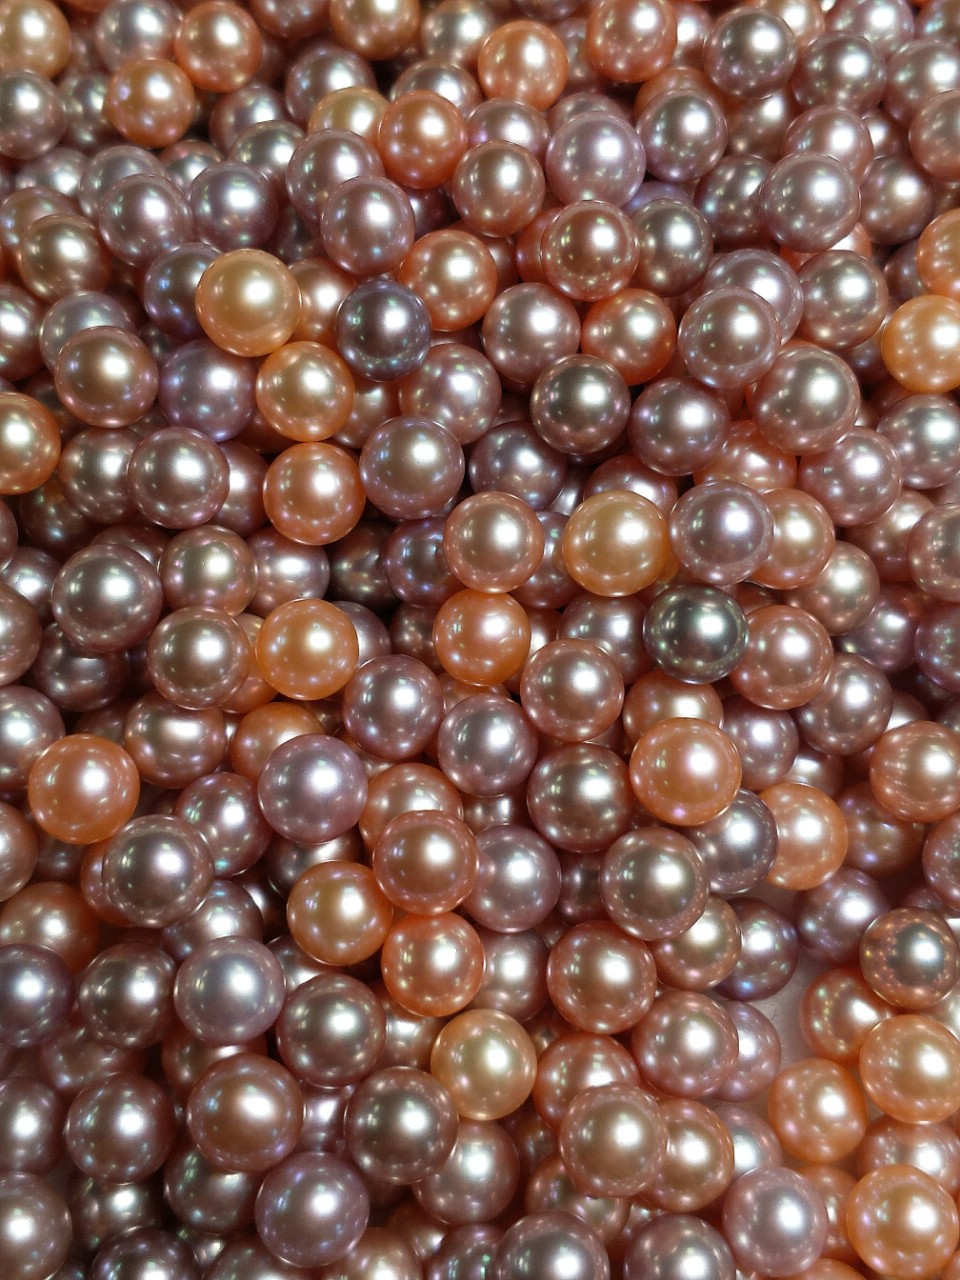 Natural freshwater pearls loose pearls champagne color pearls 7-7.5mm wholesale